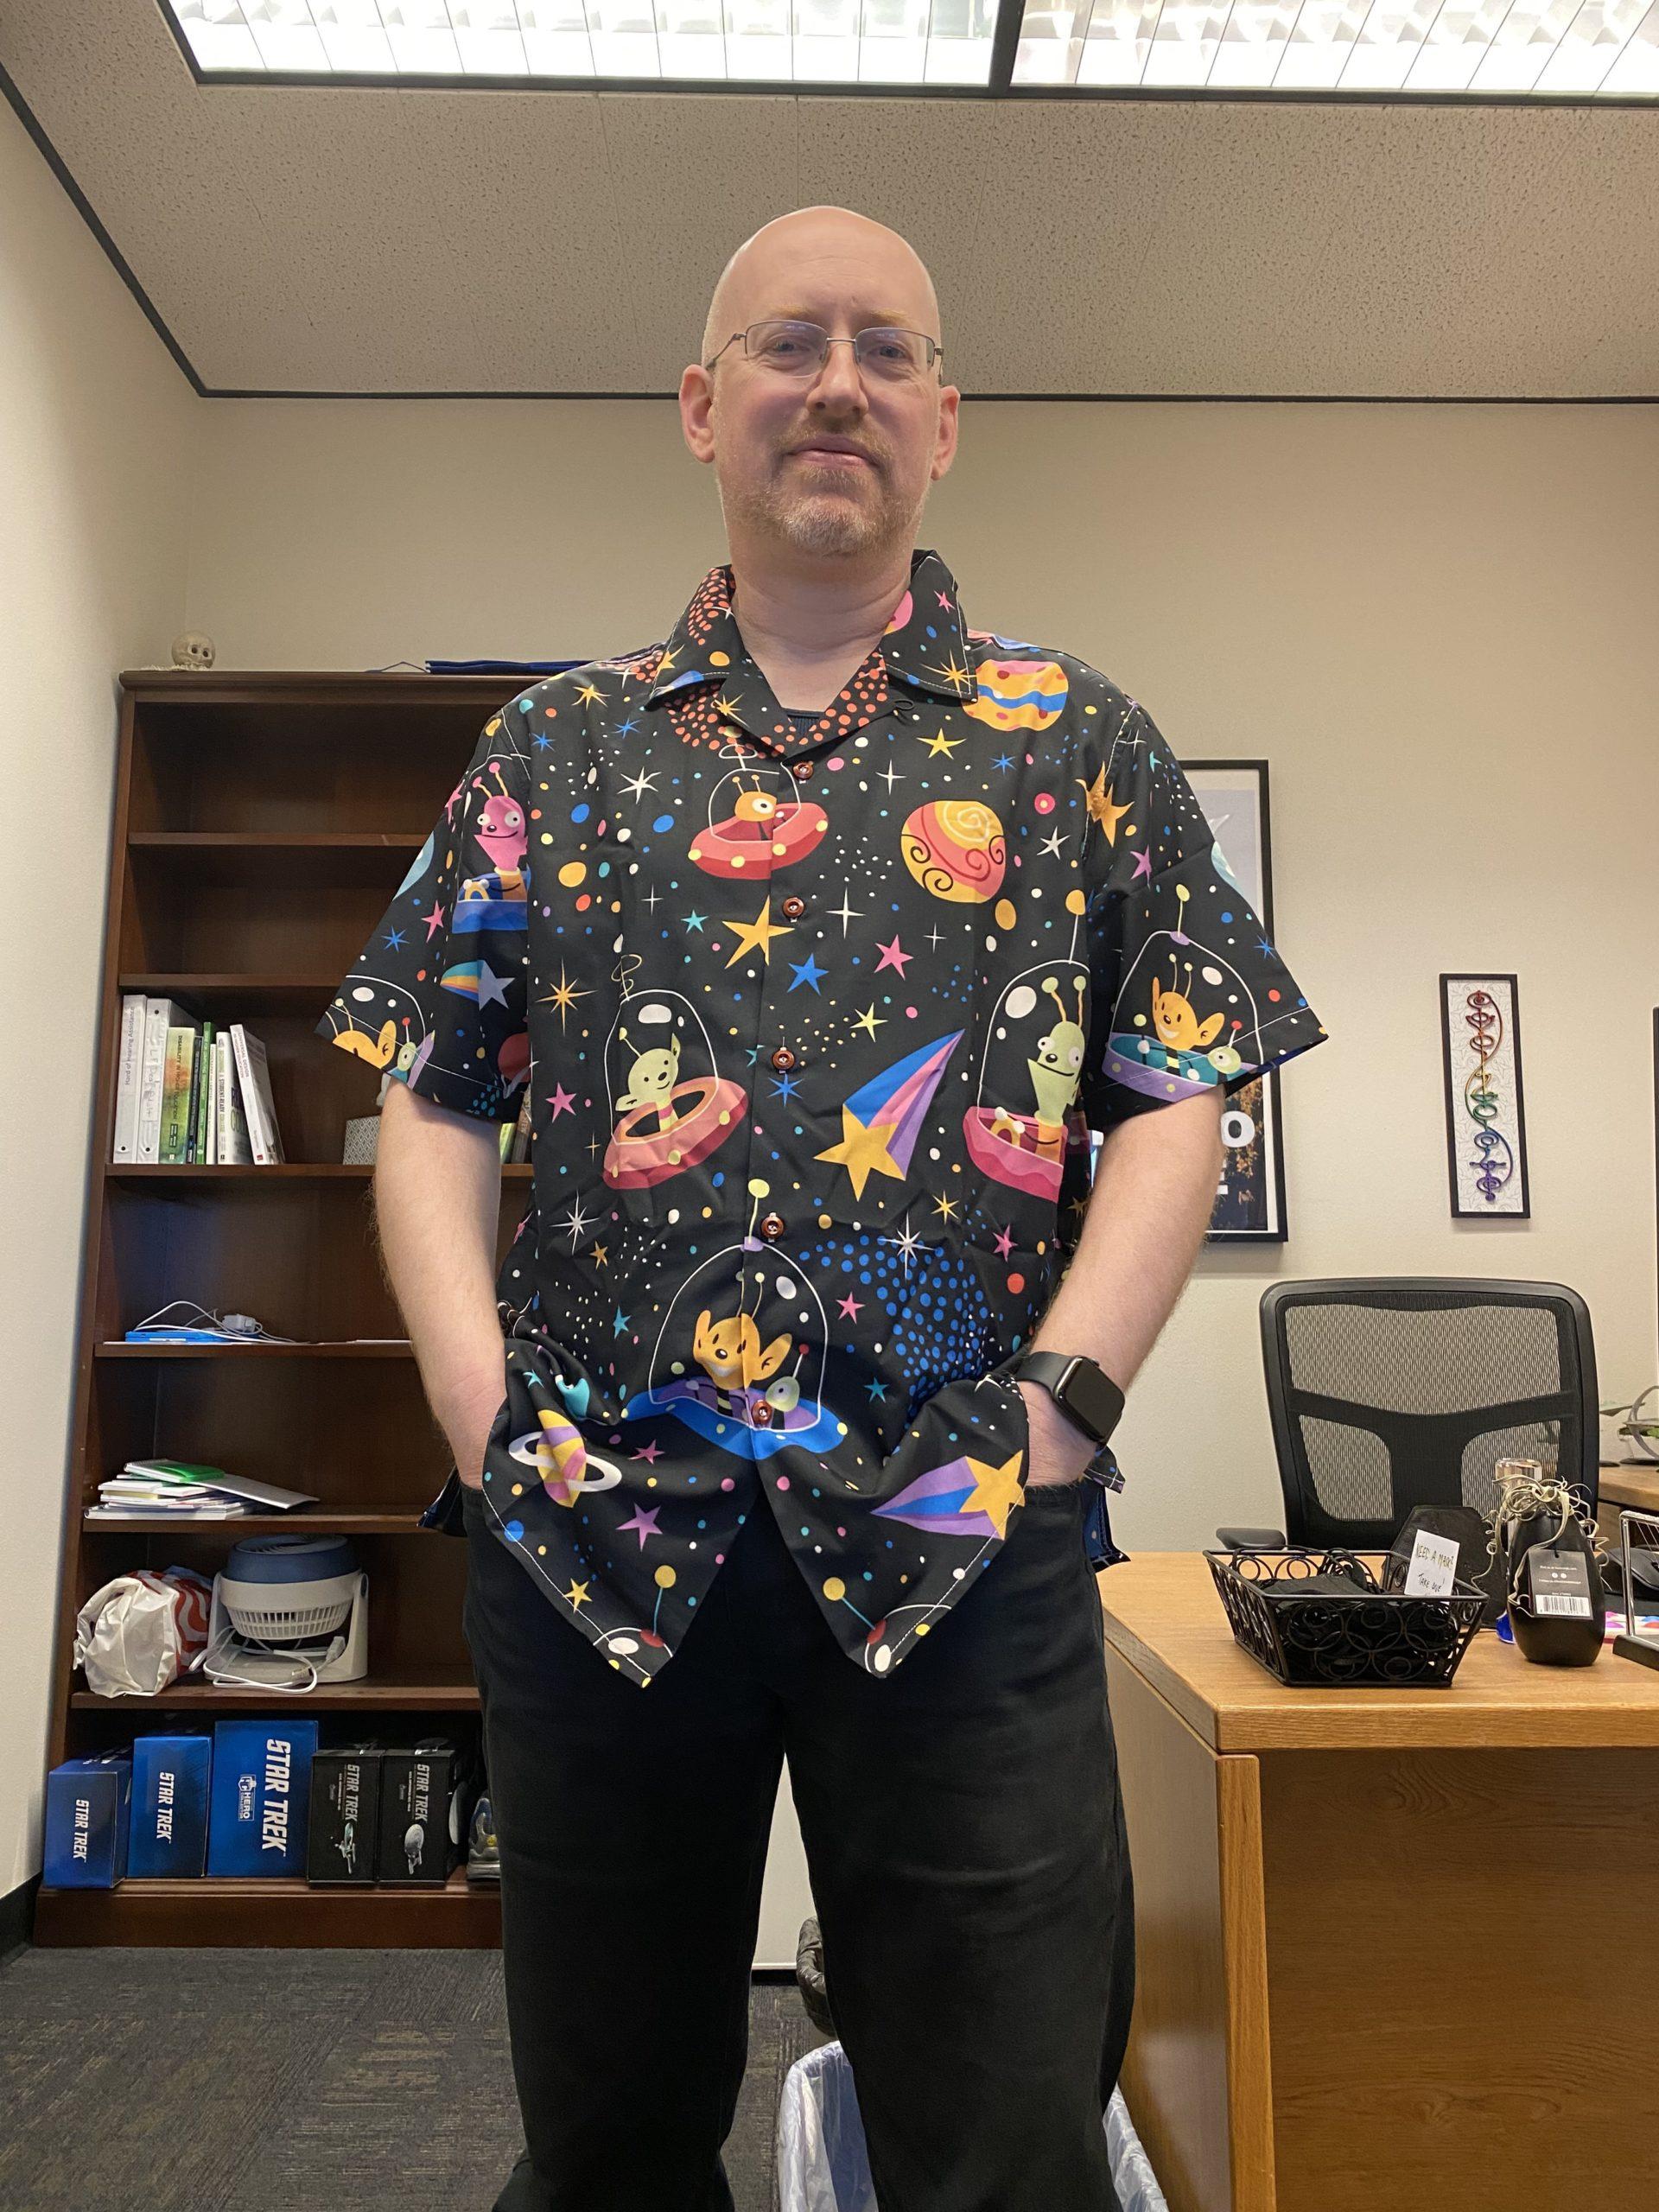 Me standing in my work office, wearing black jeans and a black short-sleeve button-up shirt with muticolored stars, planets, and aliens in UFOs.